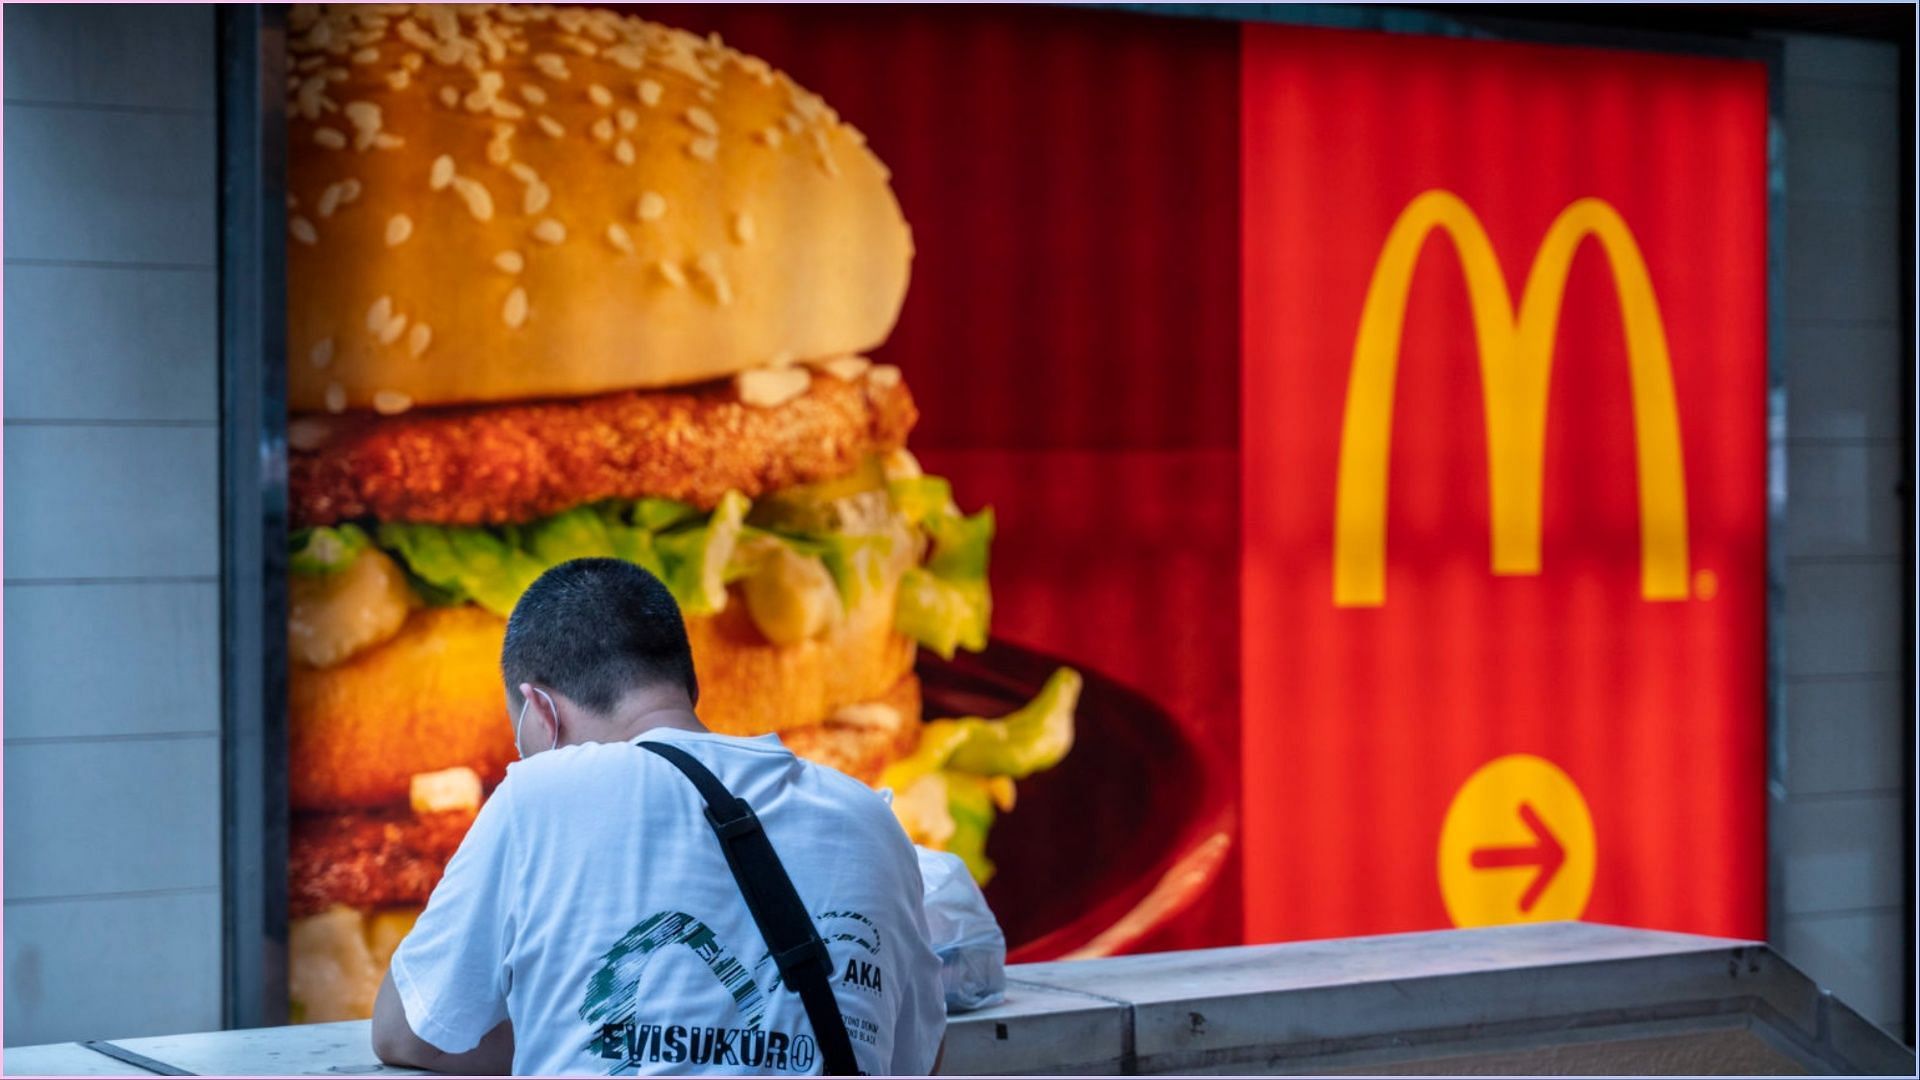 Two 10-year-olds were found to be working at a McDonald&rsquo;s franchisee in Kentucky without any pay (Image via Budrul Chukrut/ SOPA Images/ LightRocket/ Getty Images)